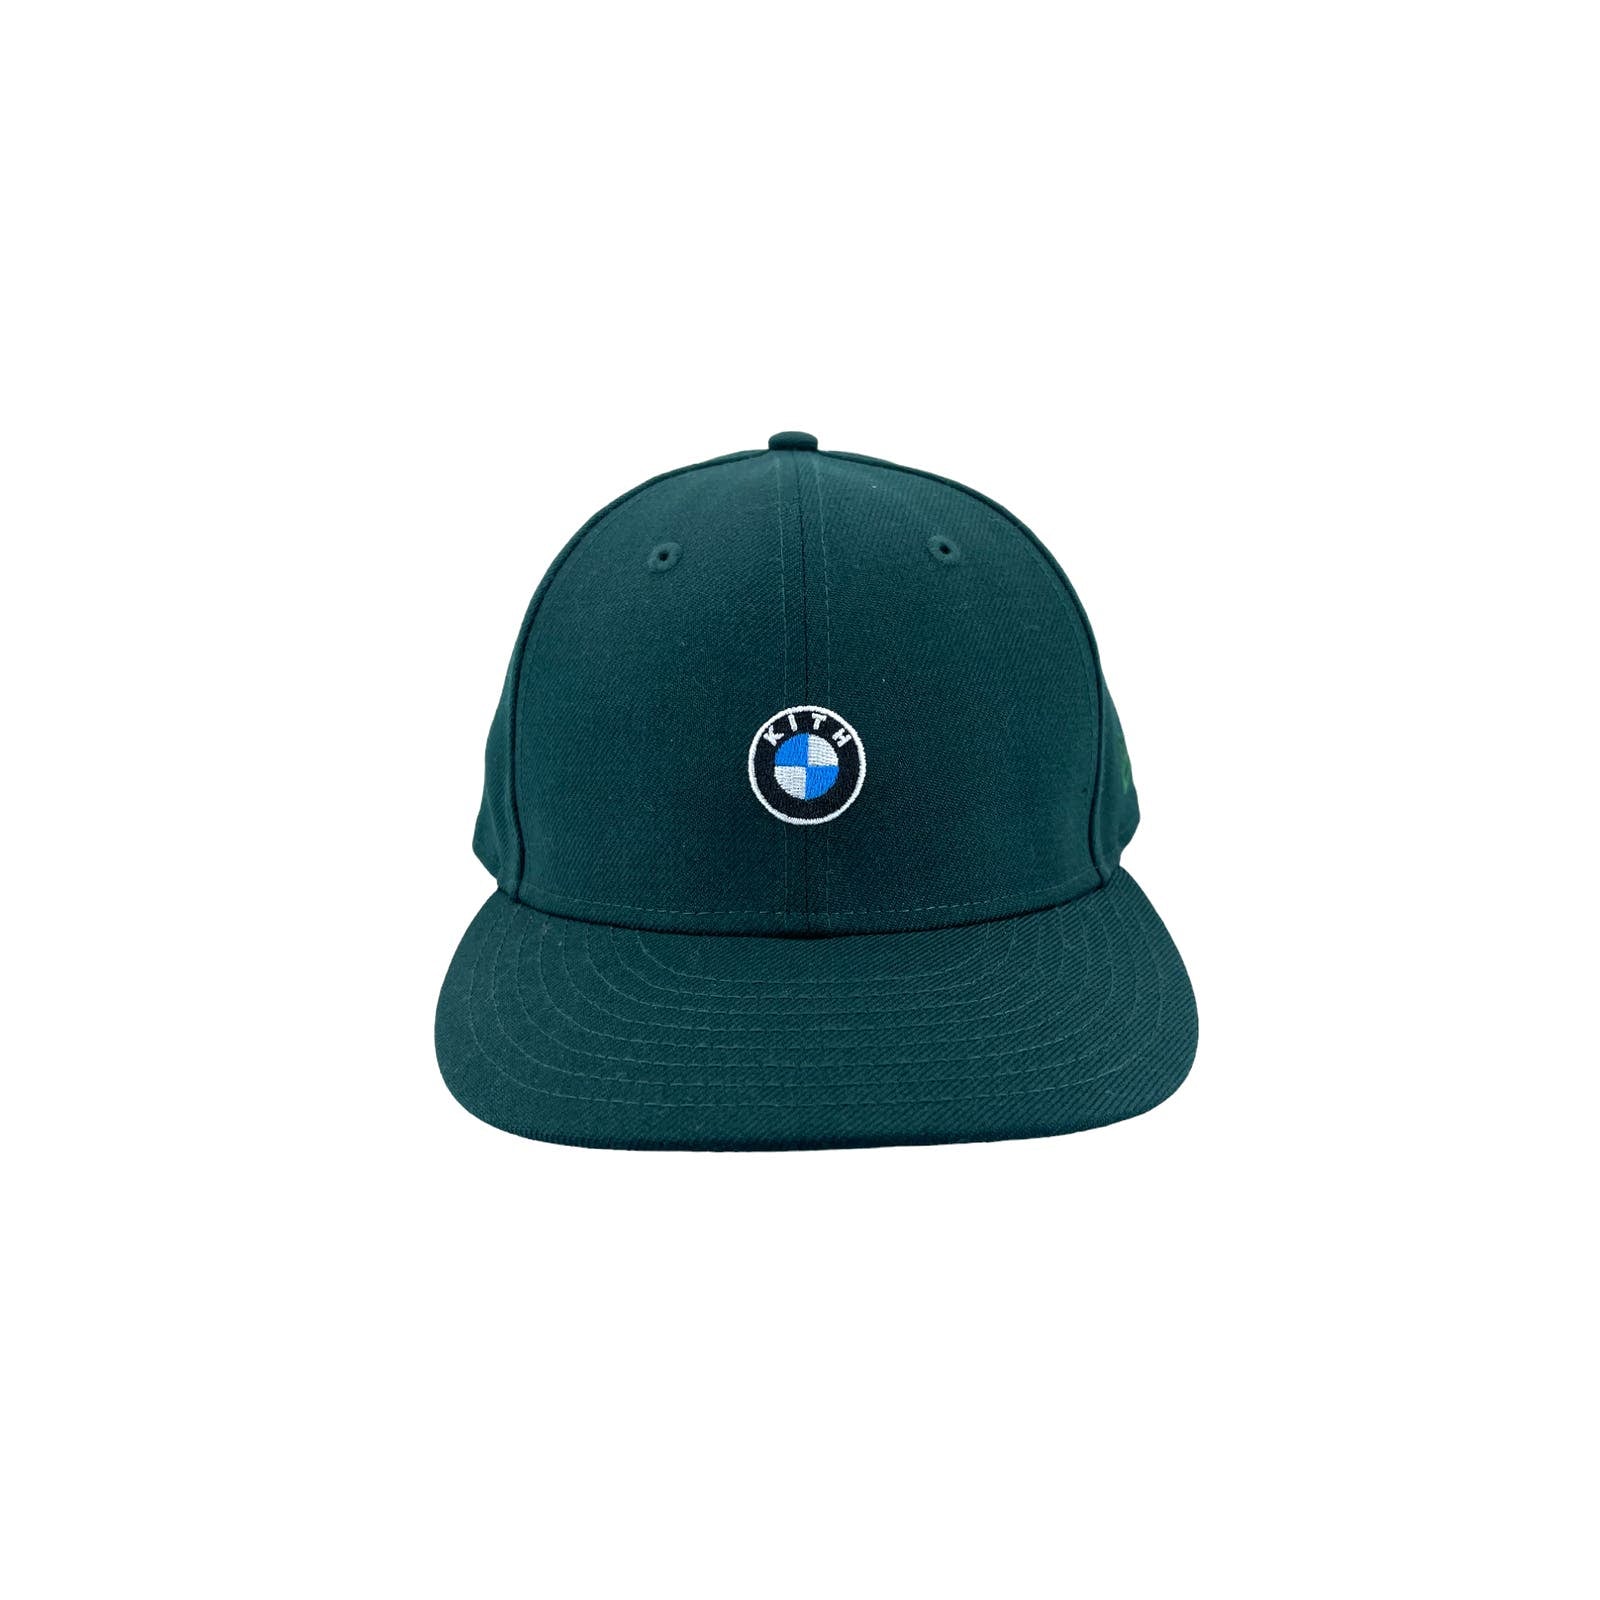 Kith x BMW New Era Vitality Green Fitted Hat Size 7 1/4 New – Groovesport